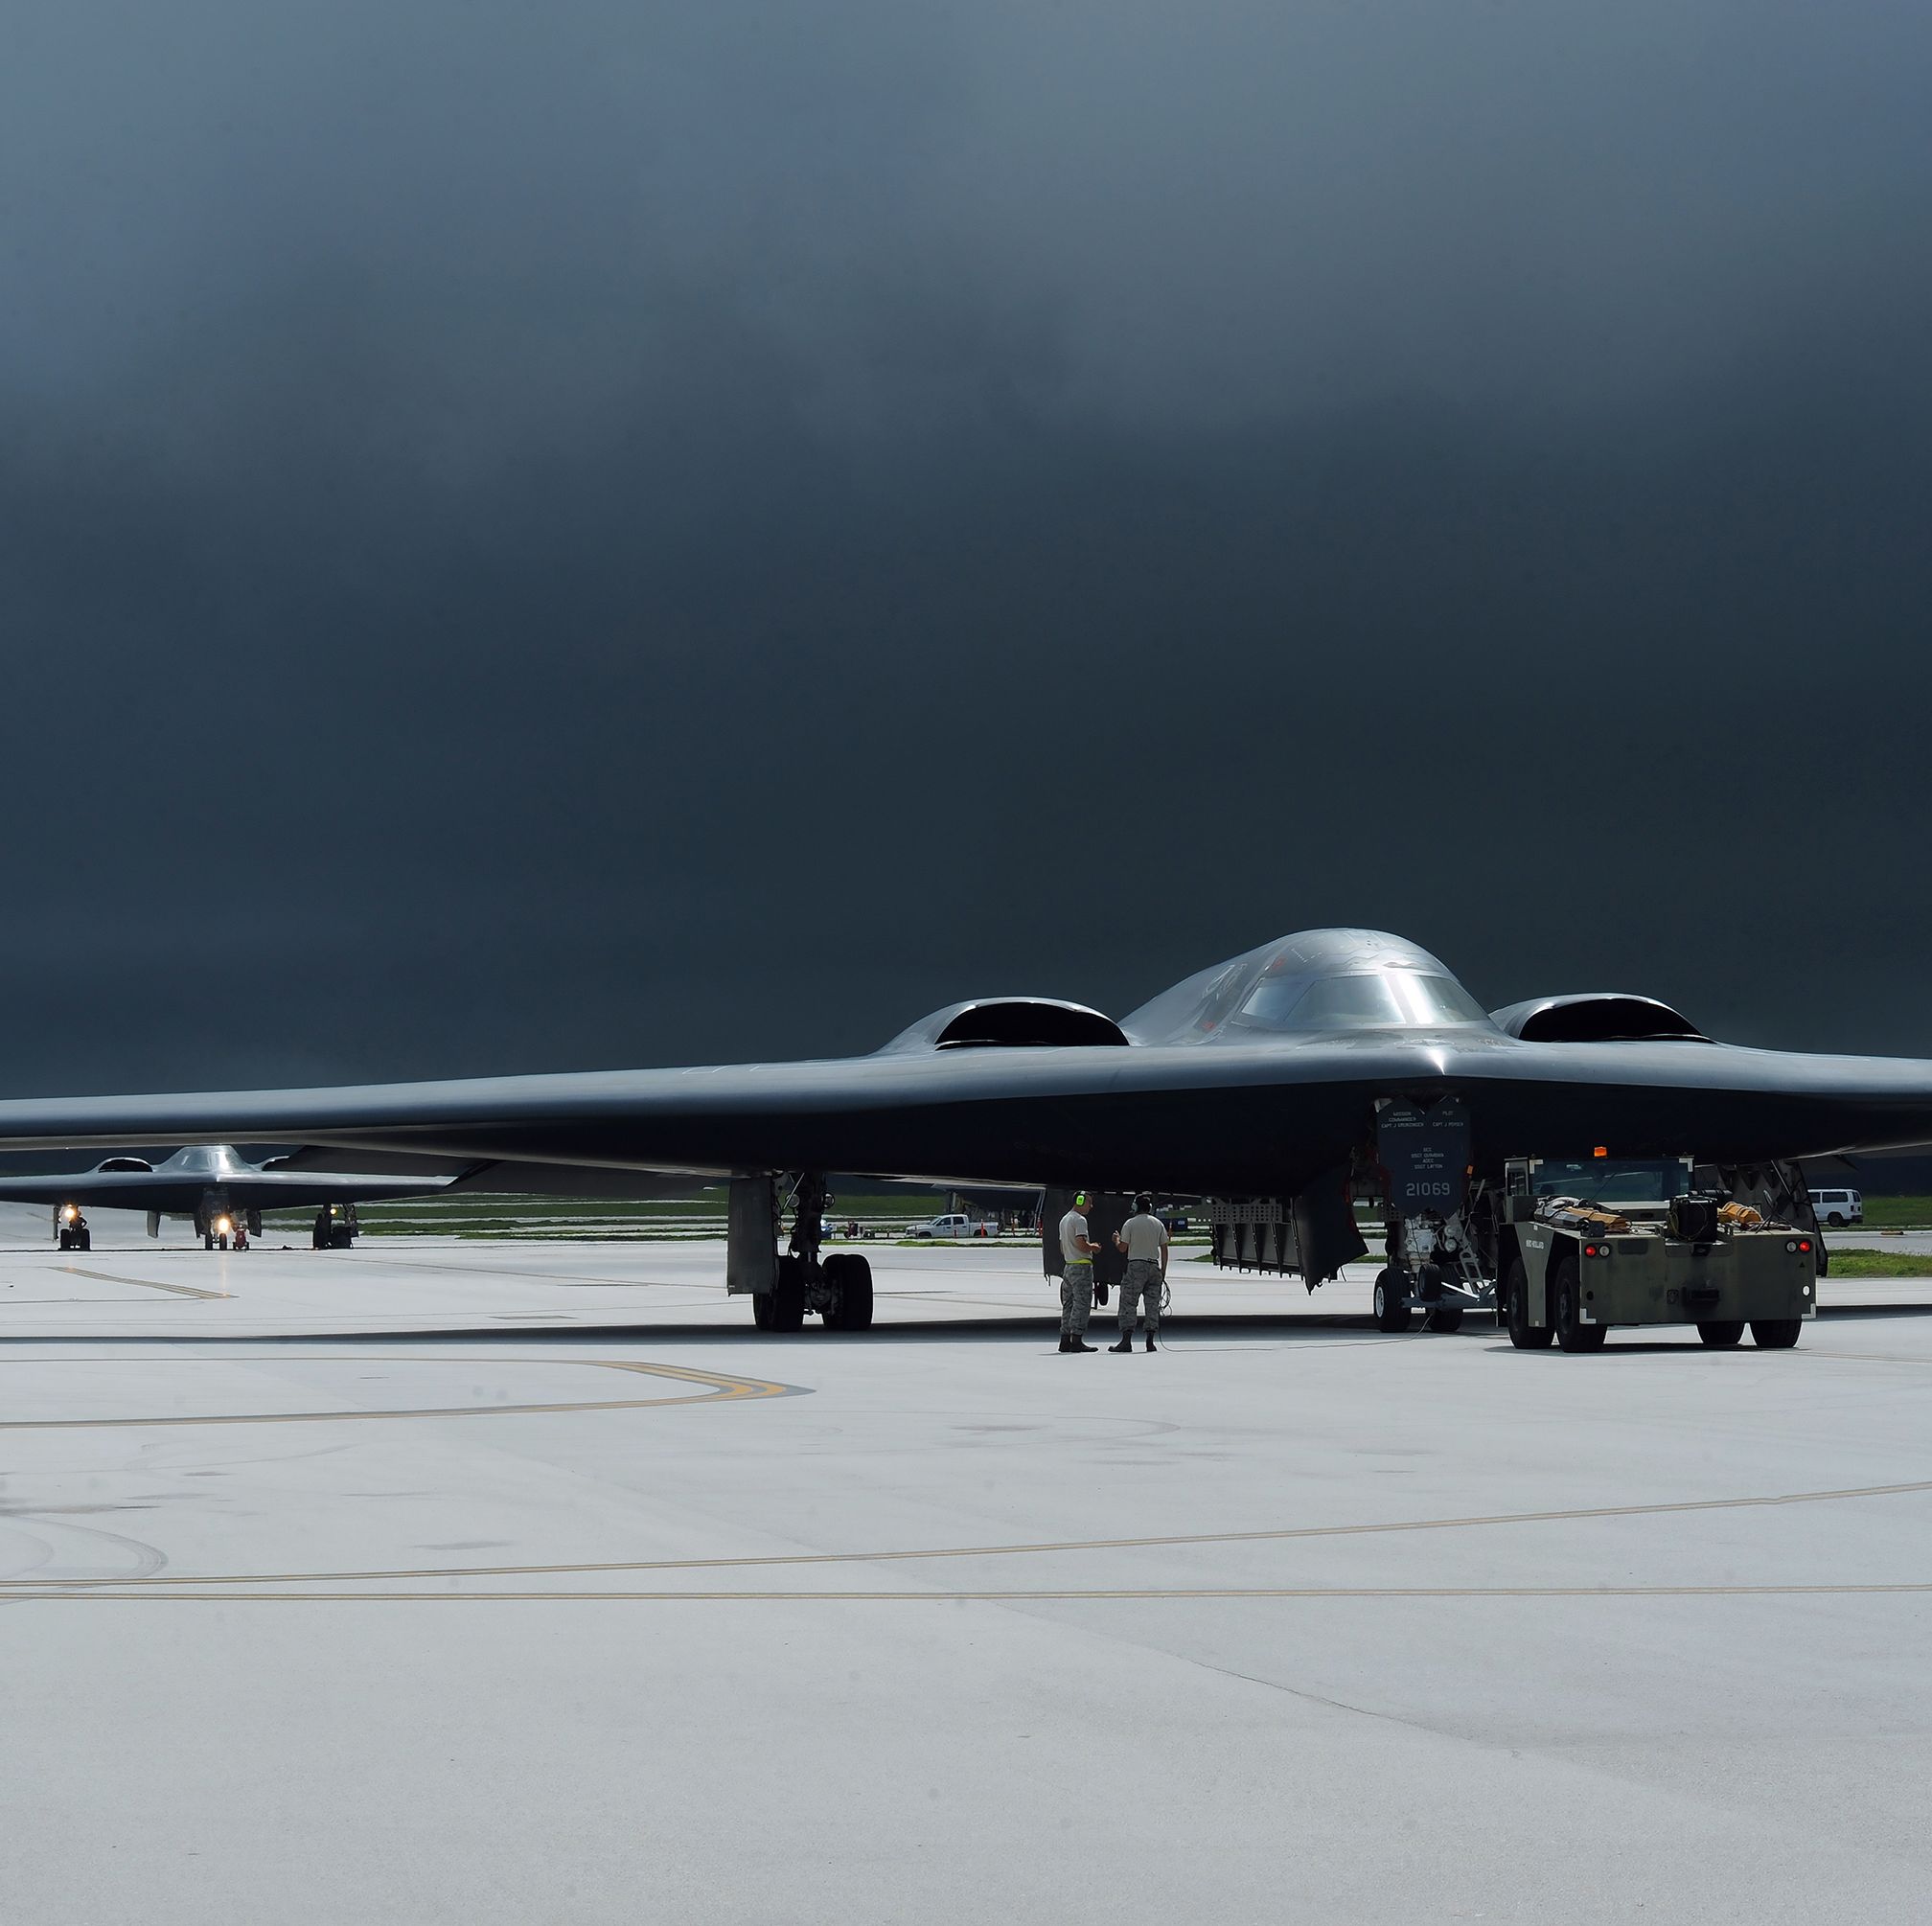 The U.S. Only Has Two Nuclear Bomber Fleets—And One Is Grounded Until Further Notice